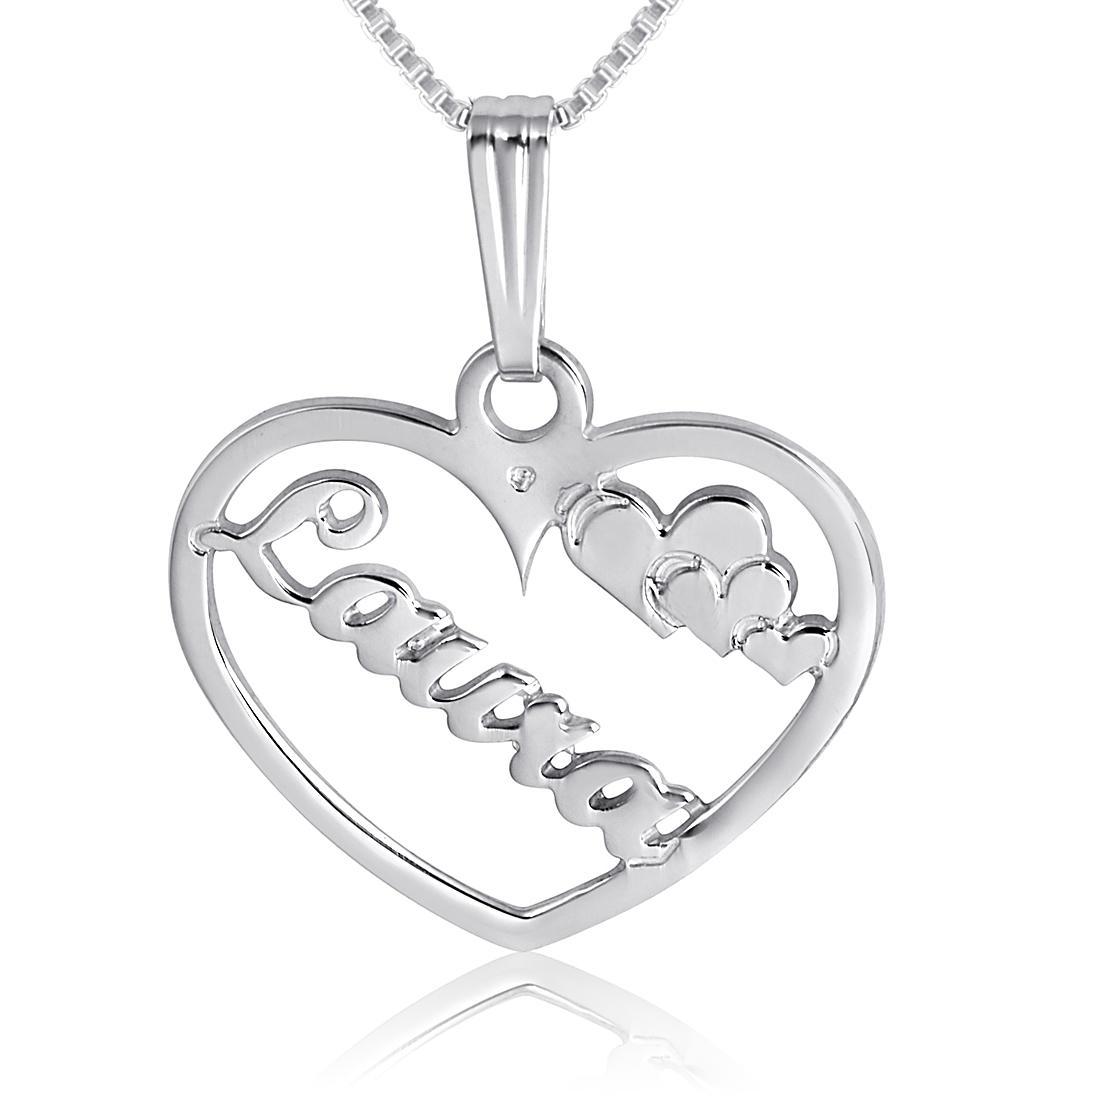 Romantic Name Necklace, Love My Name, Sterling Silver - 1